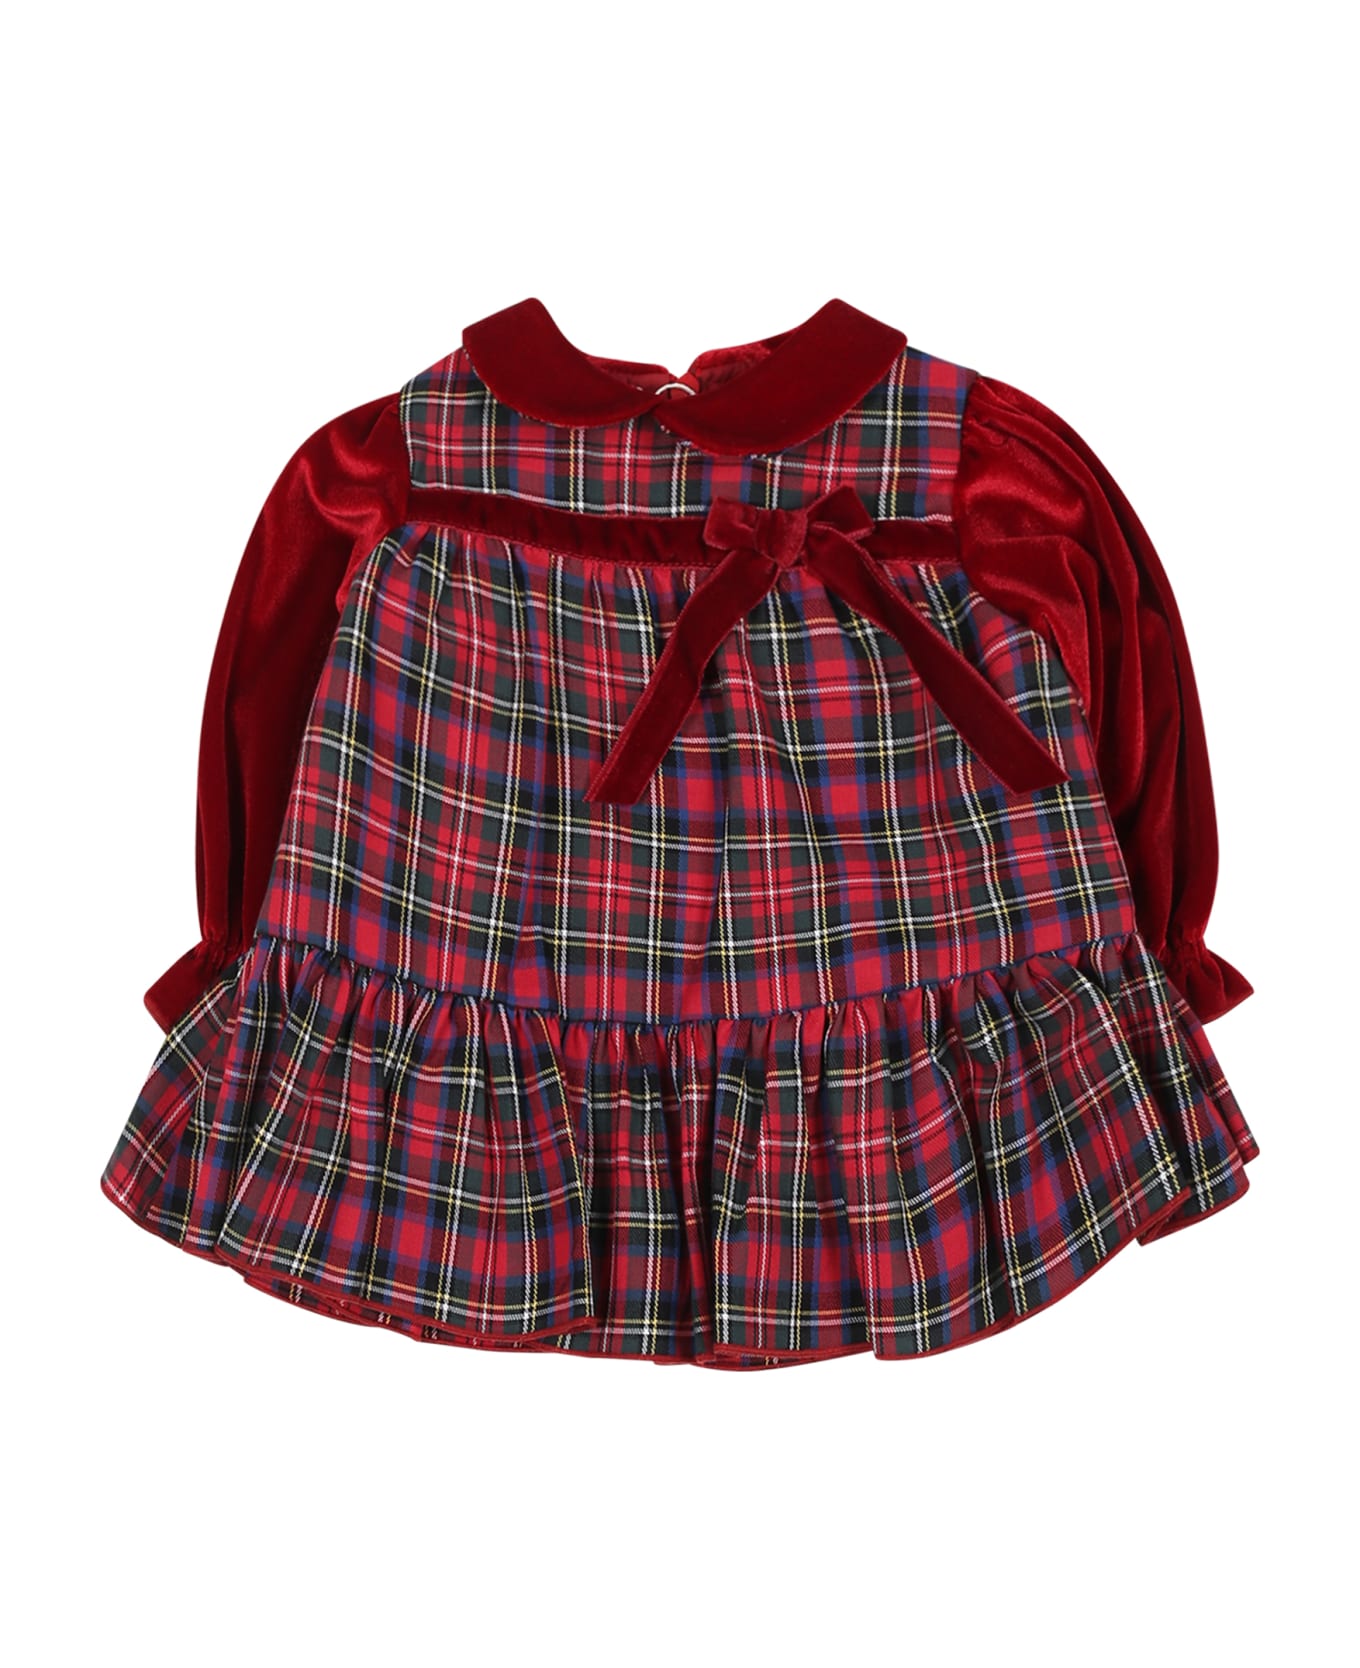 La stupenderia Red Dress Fro Baby Girl With Bow - Red